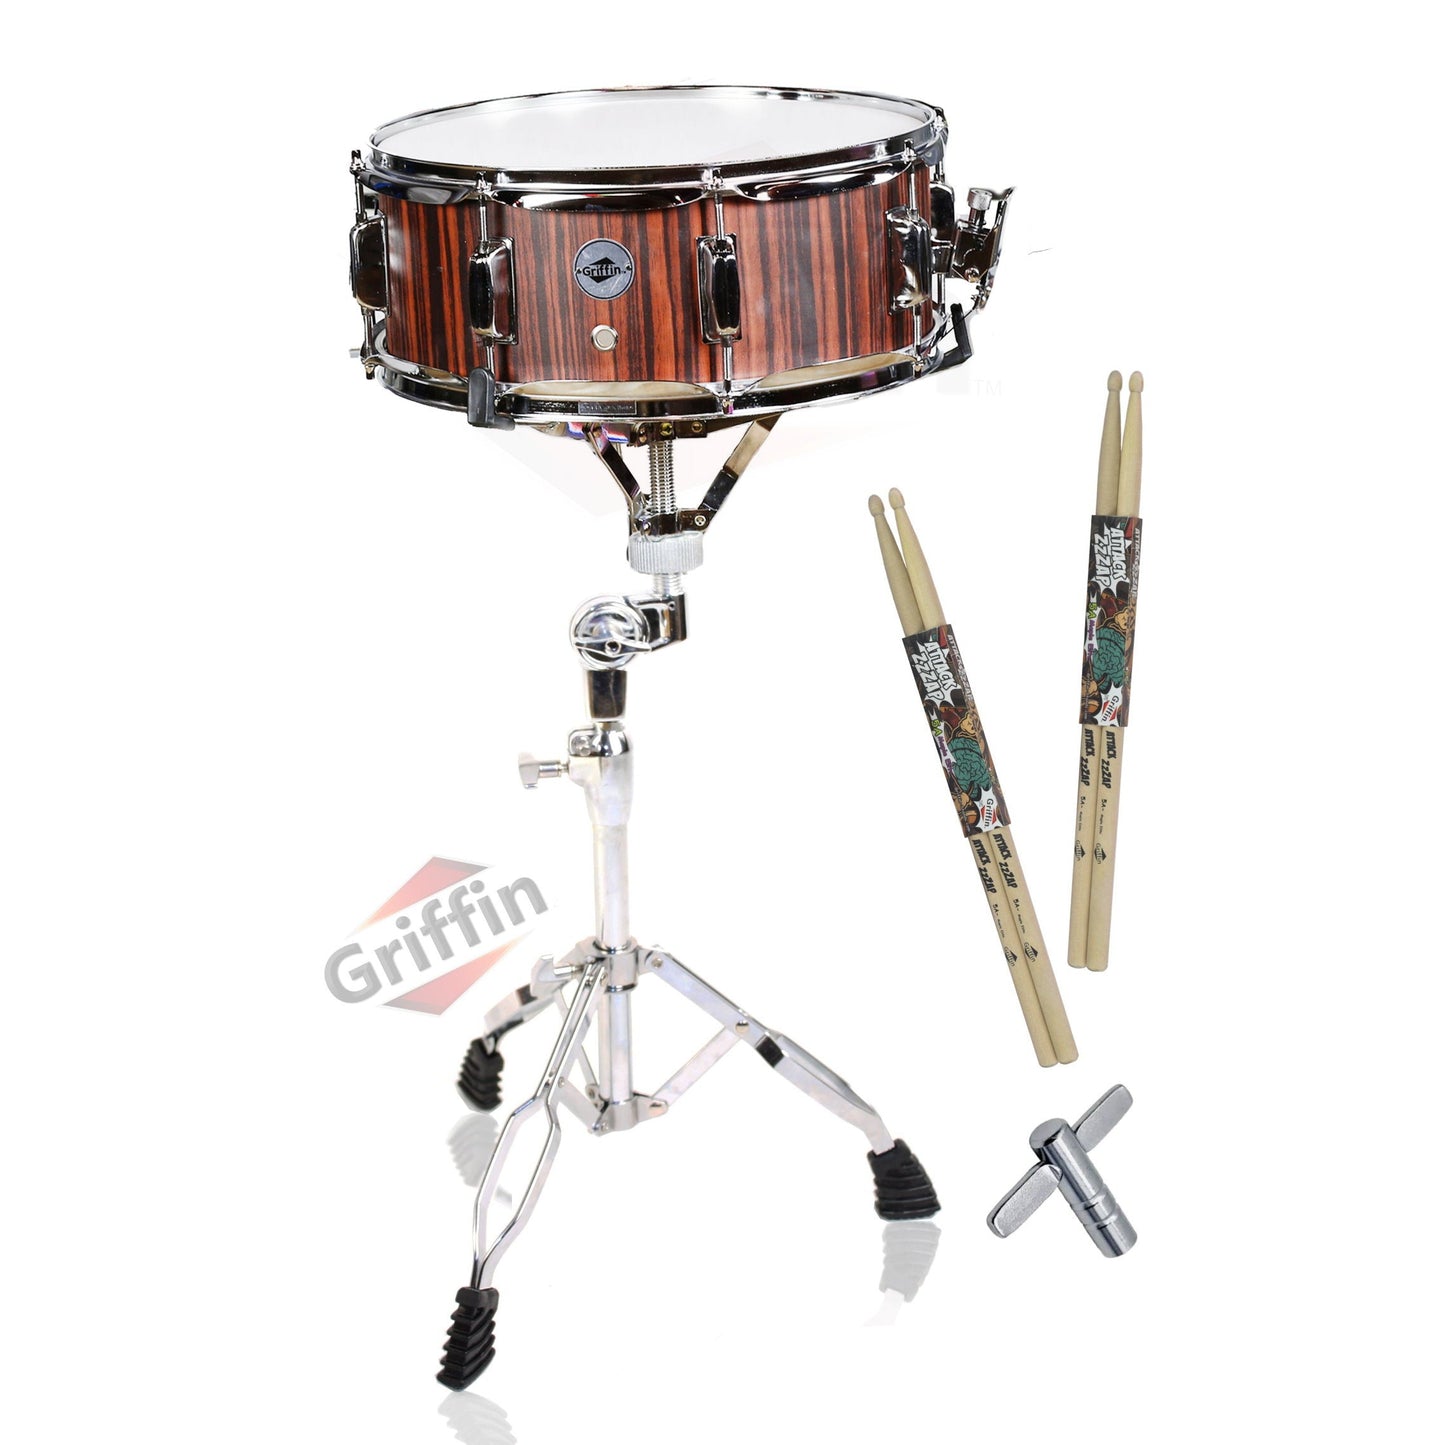 Snare Drum Set by GRIFFIN - Snare Stand, 2 Pairs of Maple Drum Sticks & Drum Key Wood Shell